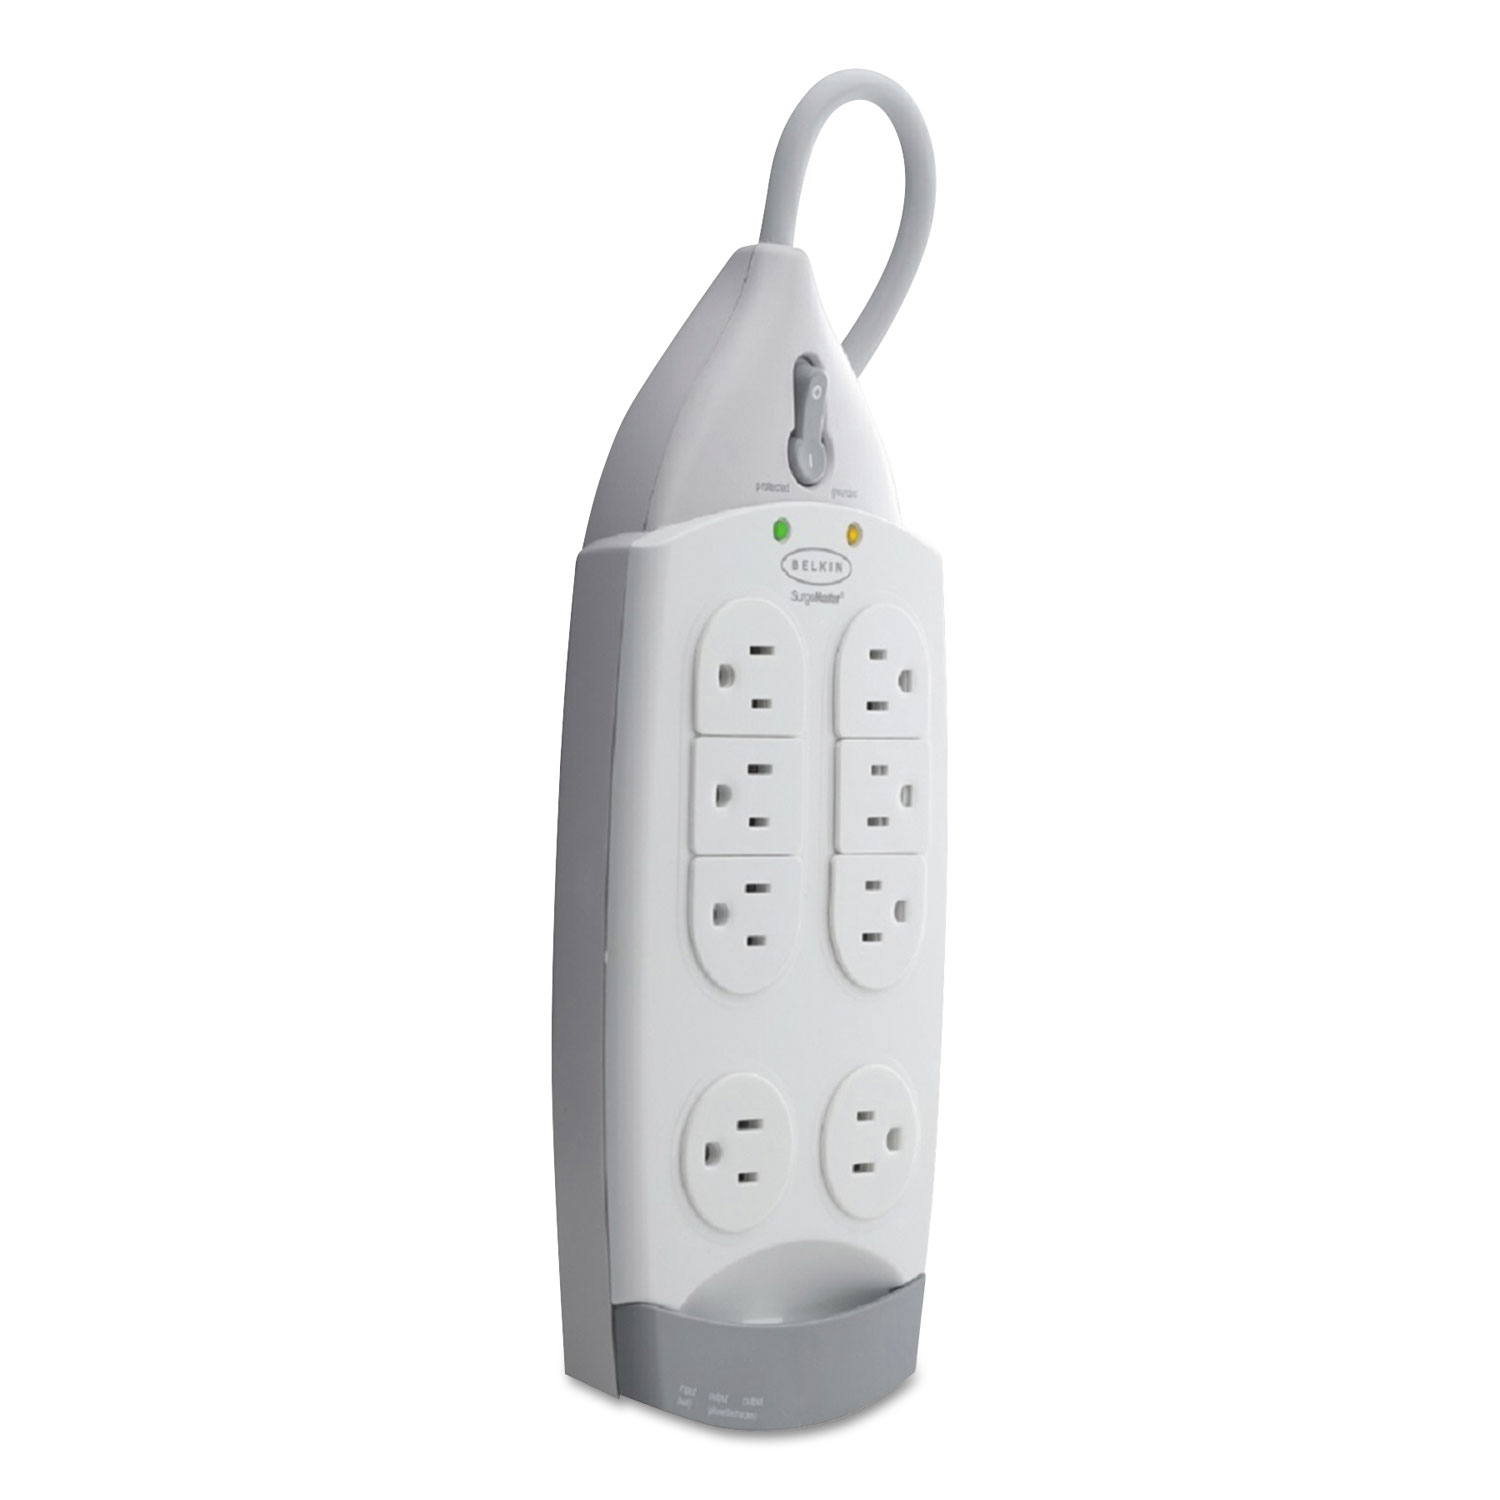  Belkin F9H710-12 SurgeMaster Home Series Surge Protector, 7 Outlets, 12 ft Cord, 1045 J, White (BLKF9H71012) 